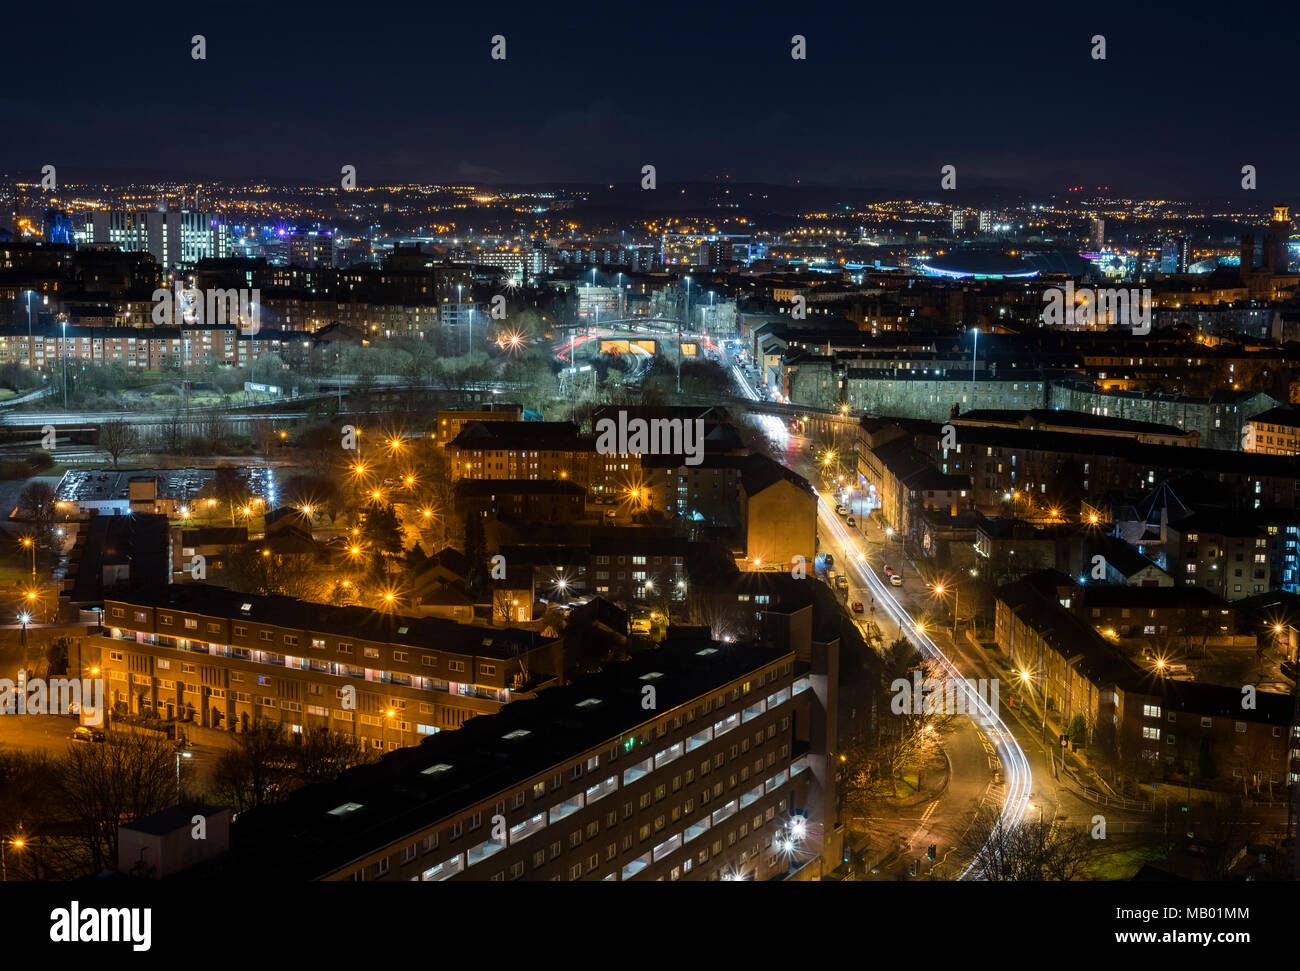 Glasgow City Aerial High Resolution Stock Photography And Images Alamy